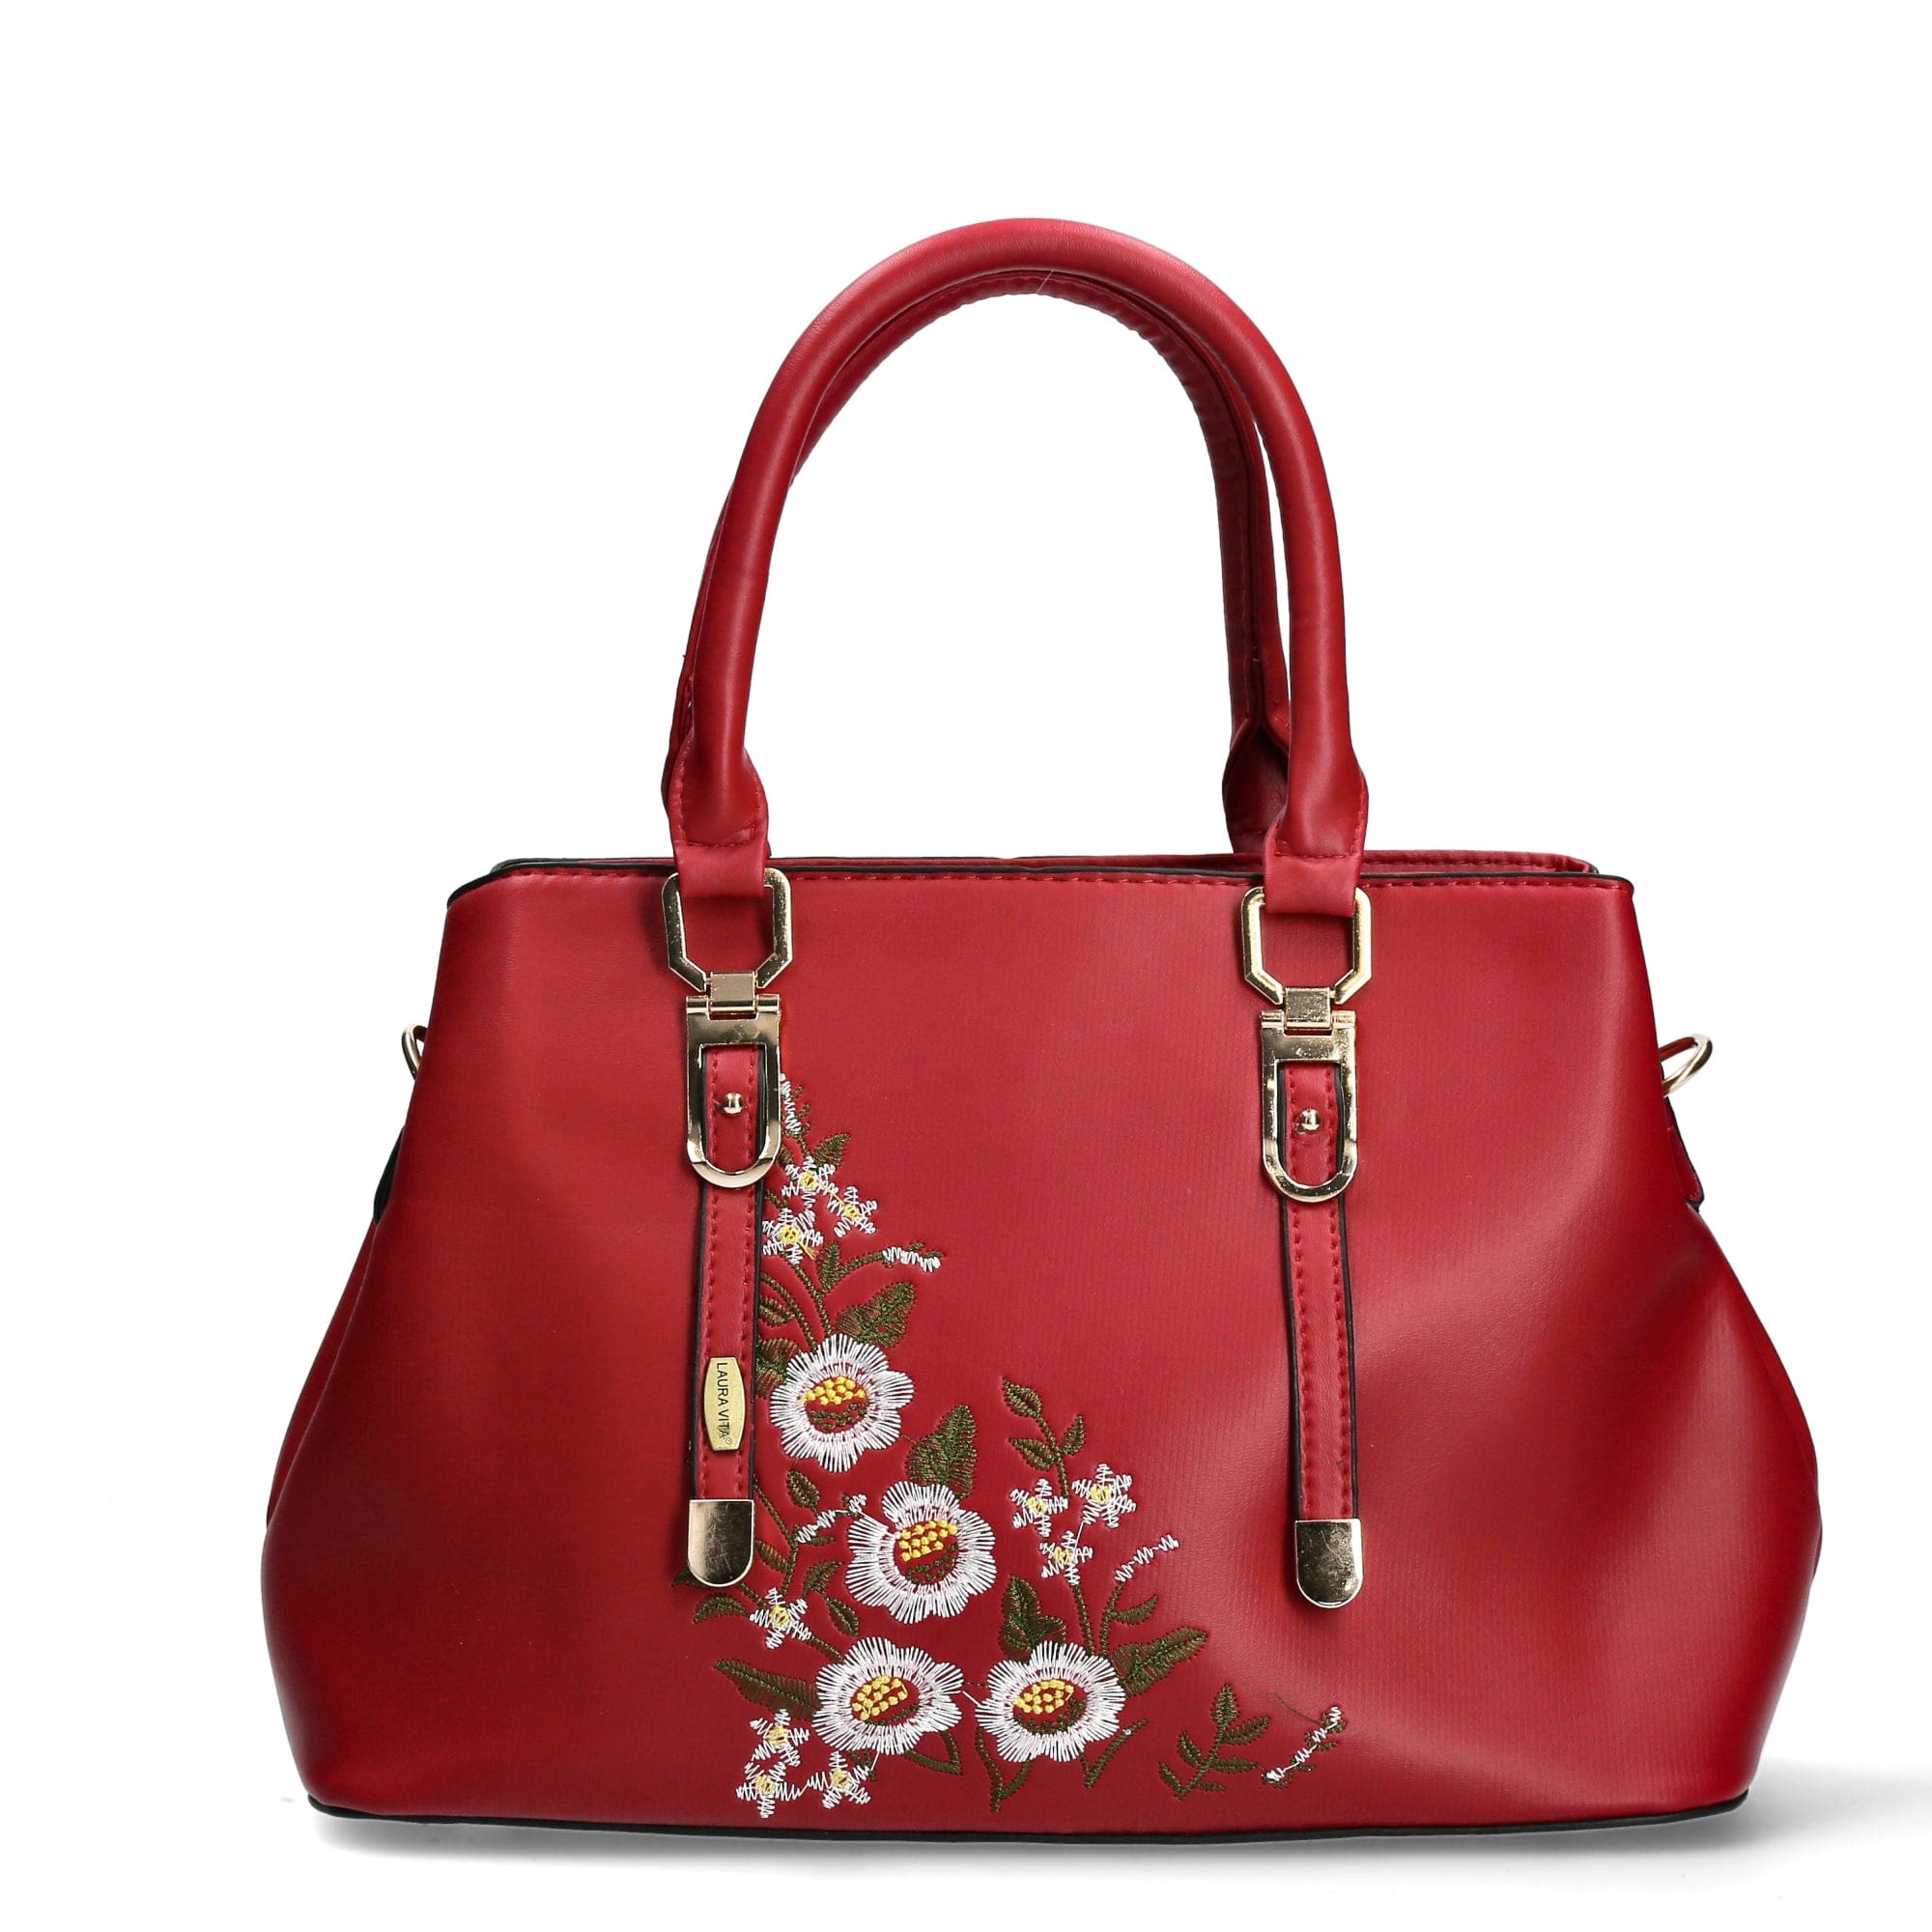 Paquito Exclusivity Bag - Red